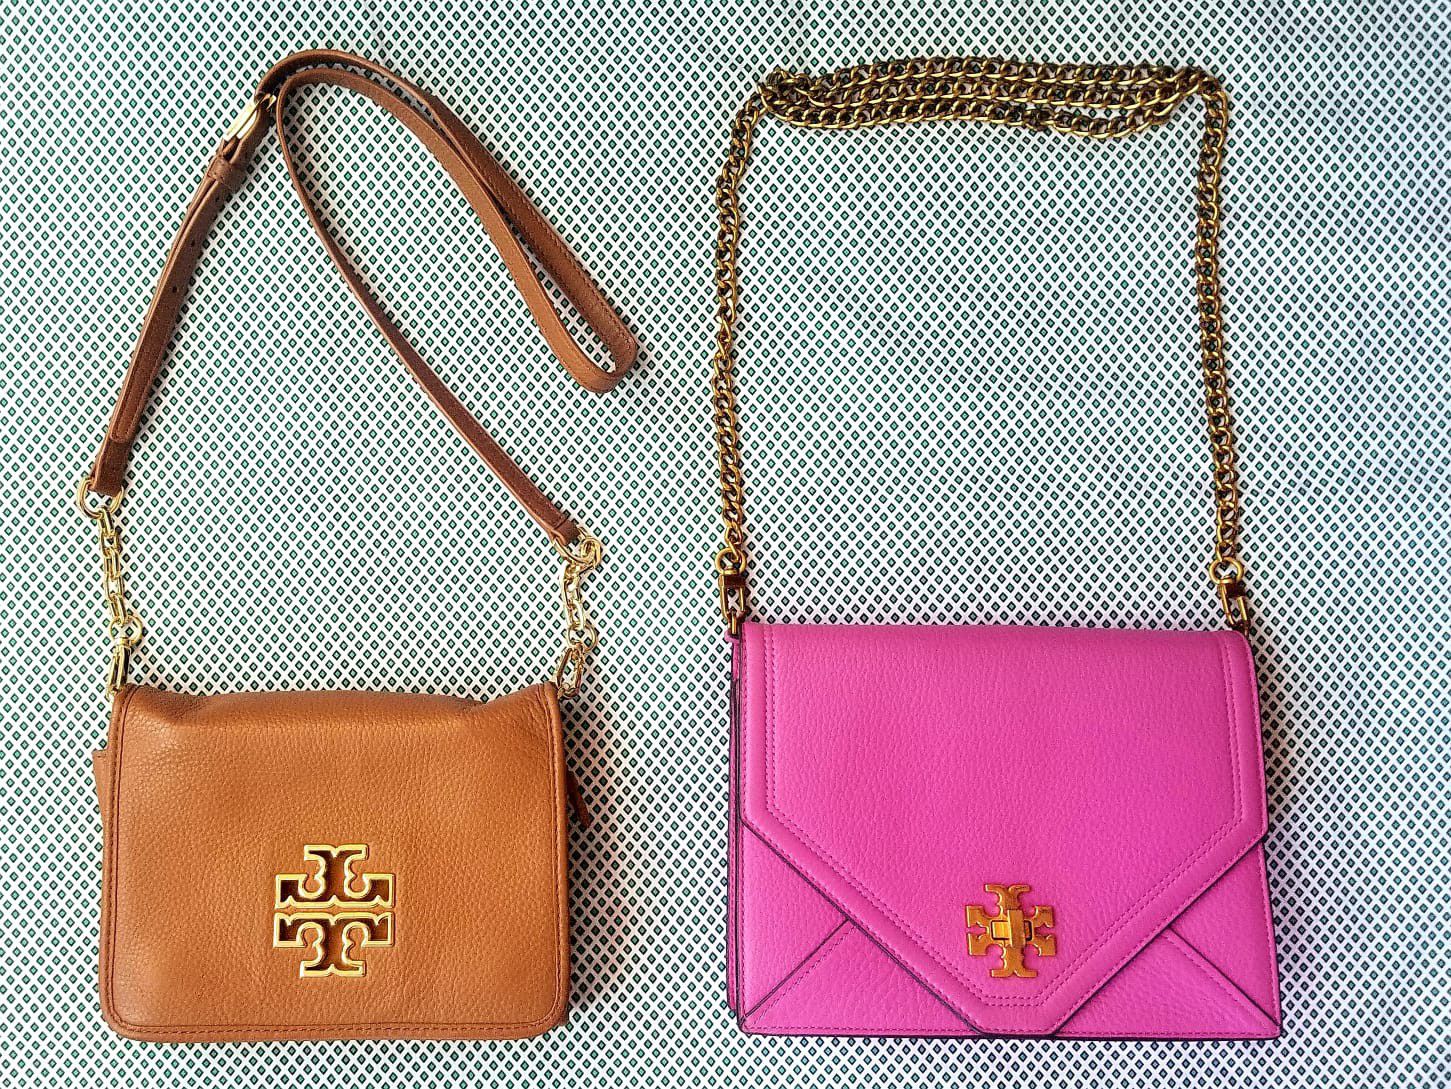 $160 for 2 Tory Burch Crossbody Bags for Sale in Tampa, FL - OfferUp